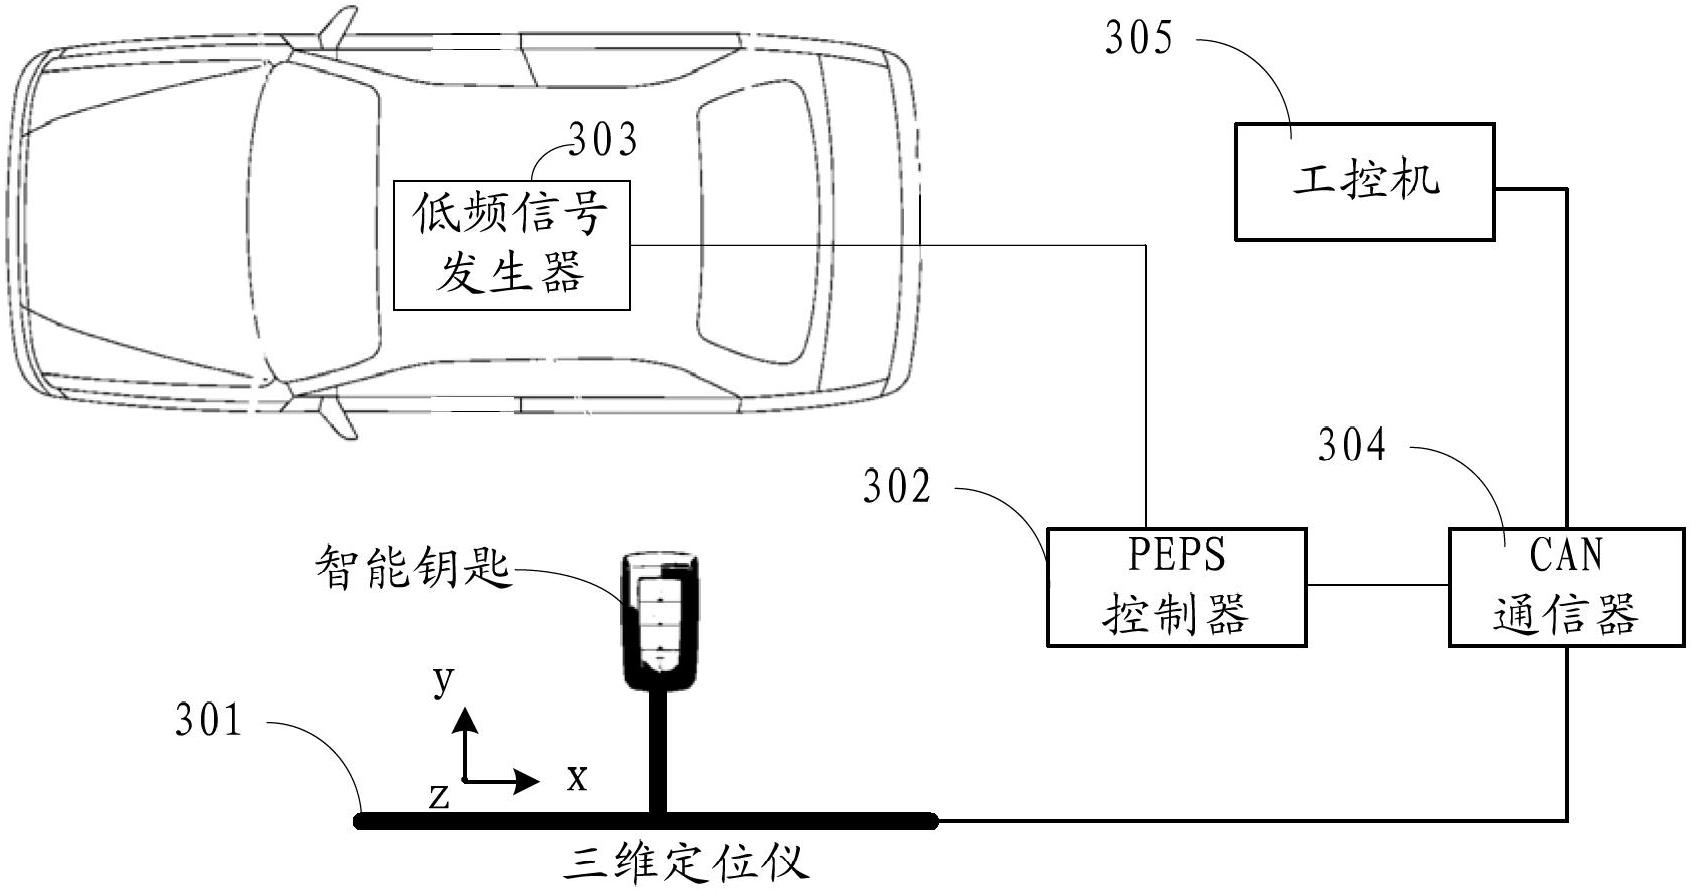 Passive keyless entry and passive keyless start (PEPS) low-frequency calibration system and method